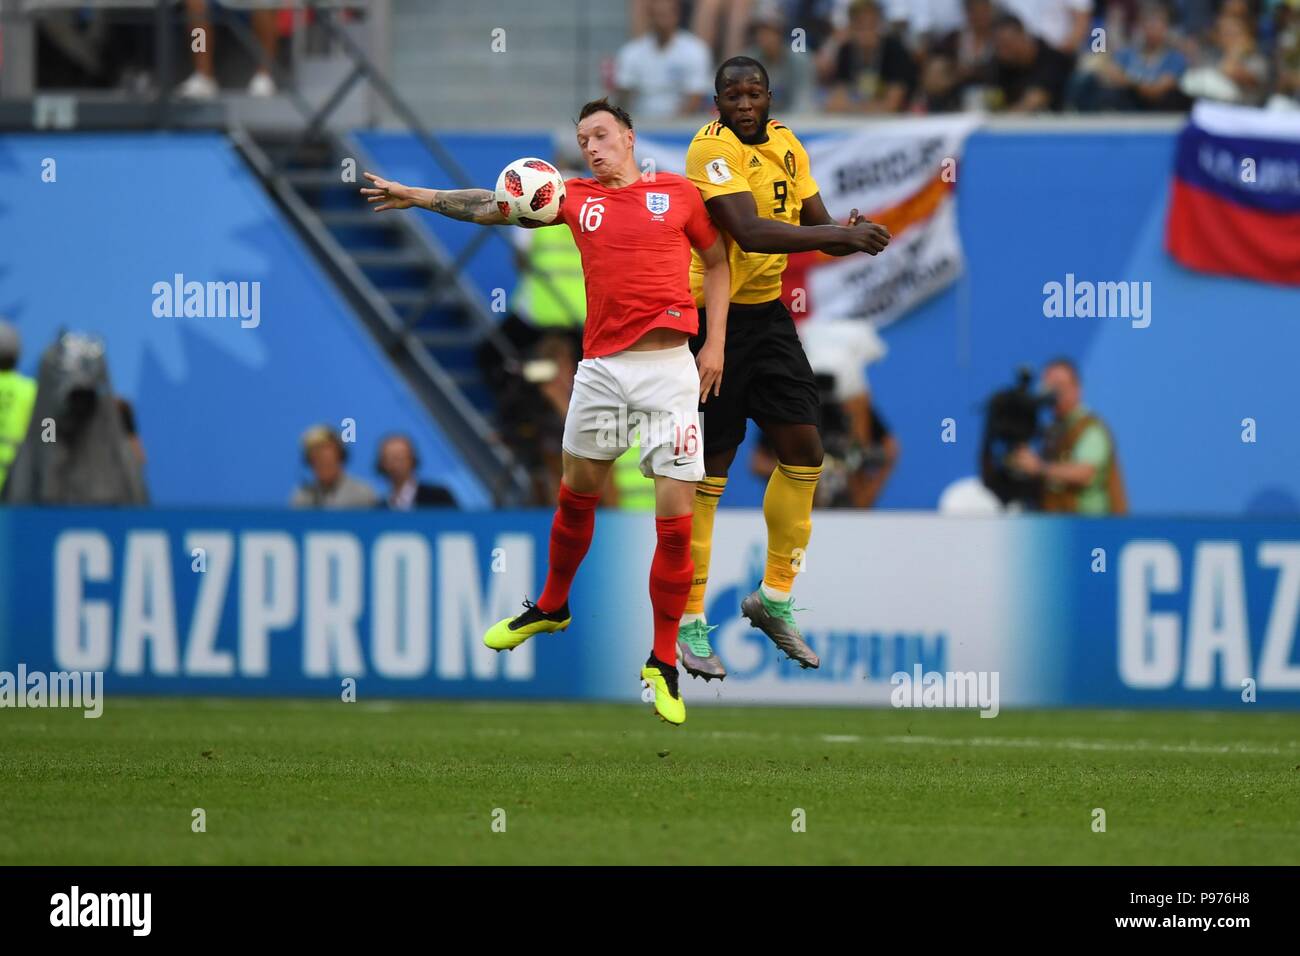 July 14th, 2018, St Petersburg, Russia. Phil Jones of England and Romelu Lukaku of Belgium in action during the 2018 FIFA World Cup Russia match between England and Belgium at Saint-Petersburg Stadium, Russia. Shoja Lak/Alamy Live News Stock Photo